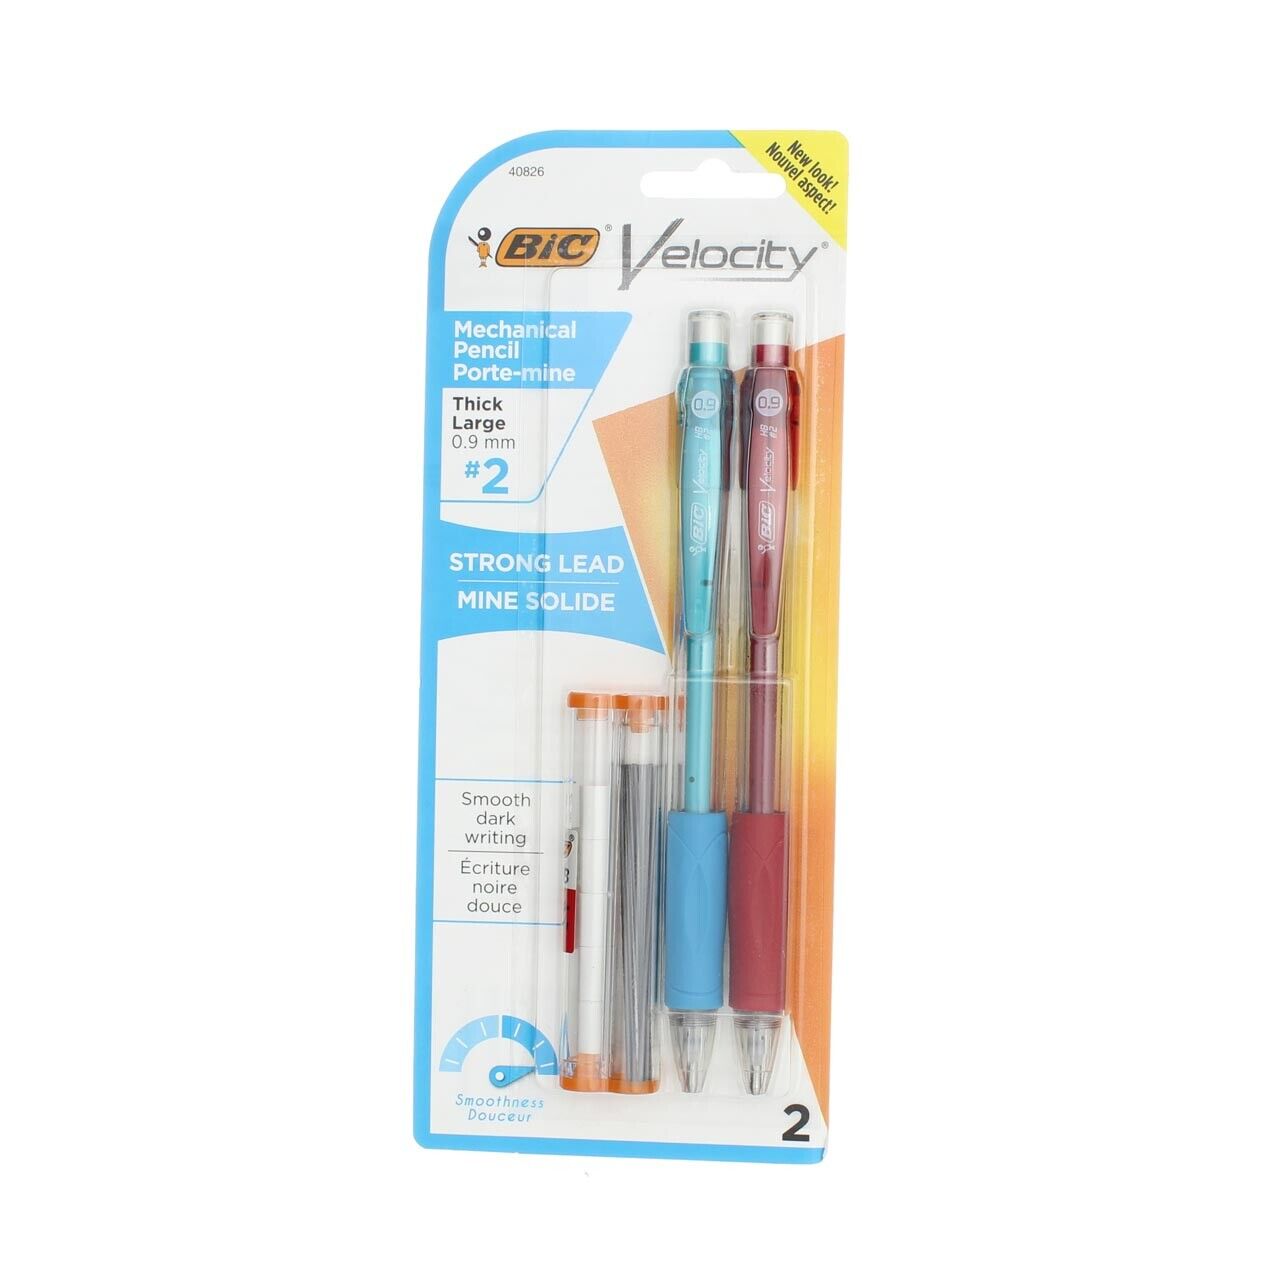 BiC Velocity Strong Lead Mechanical Pencil & Refills, 0.9 mm, #2, 2 Ct